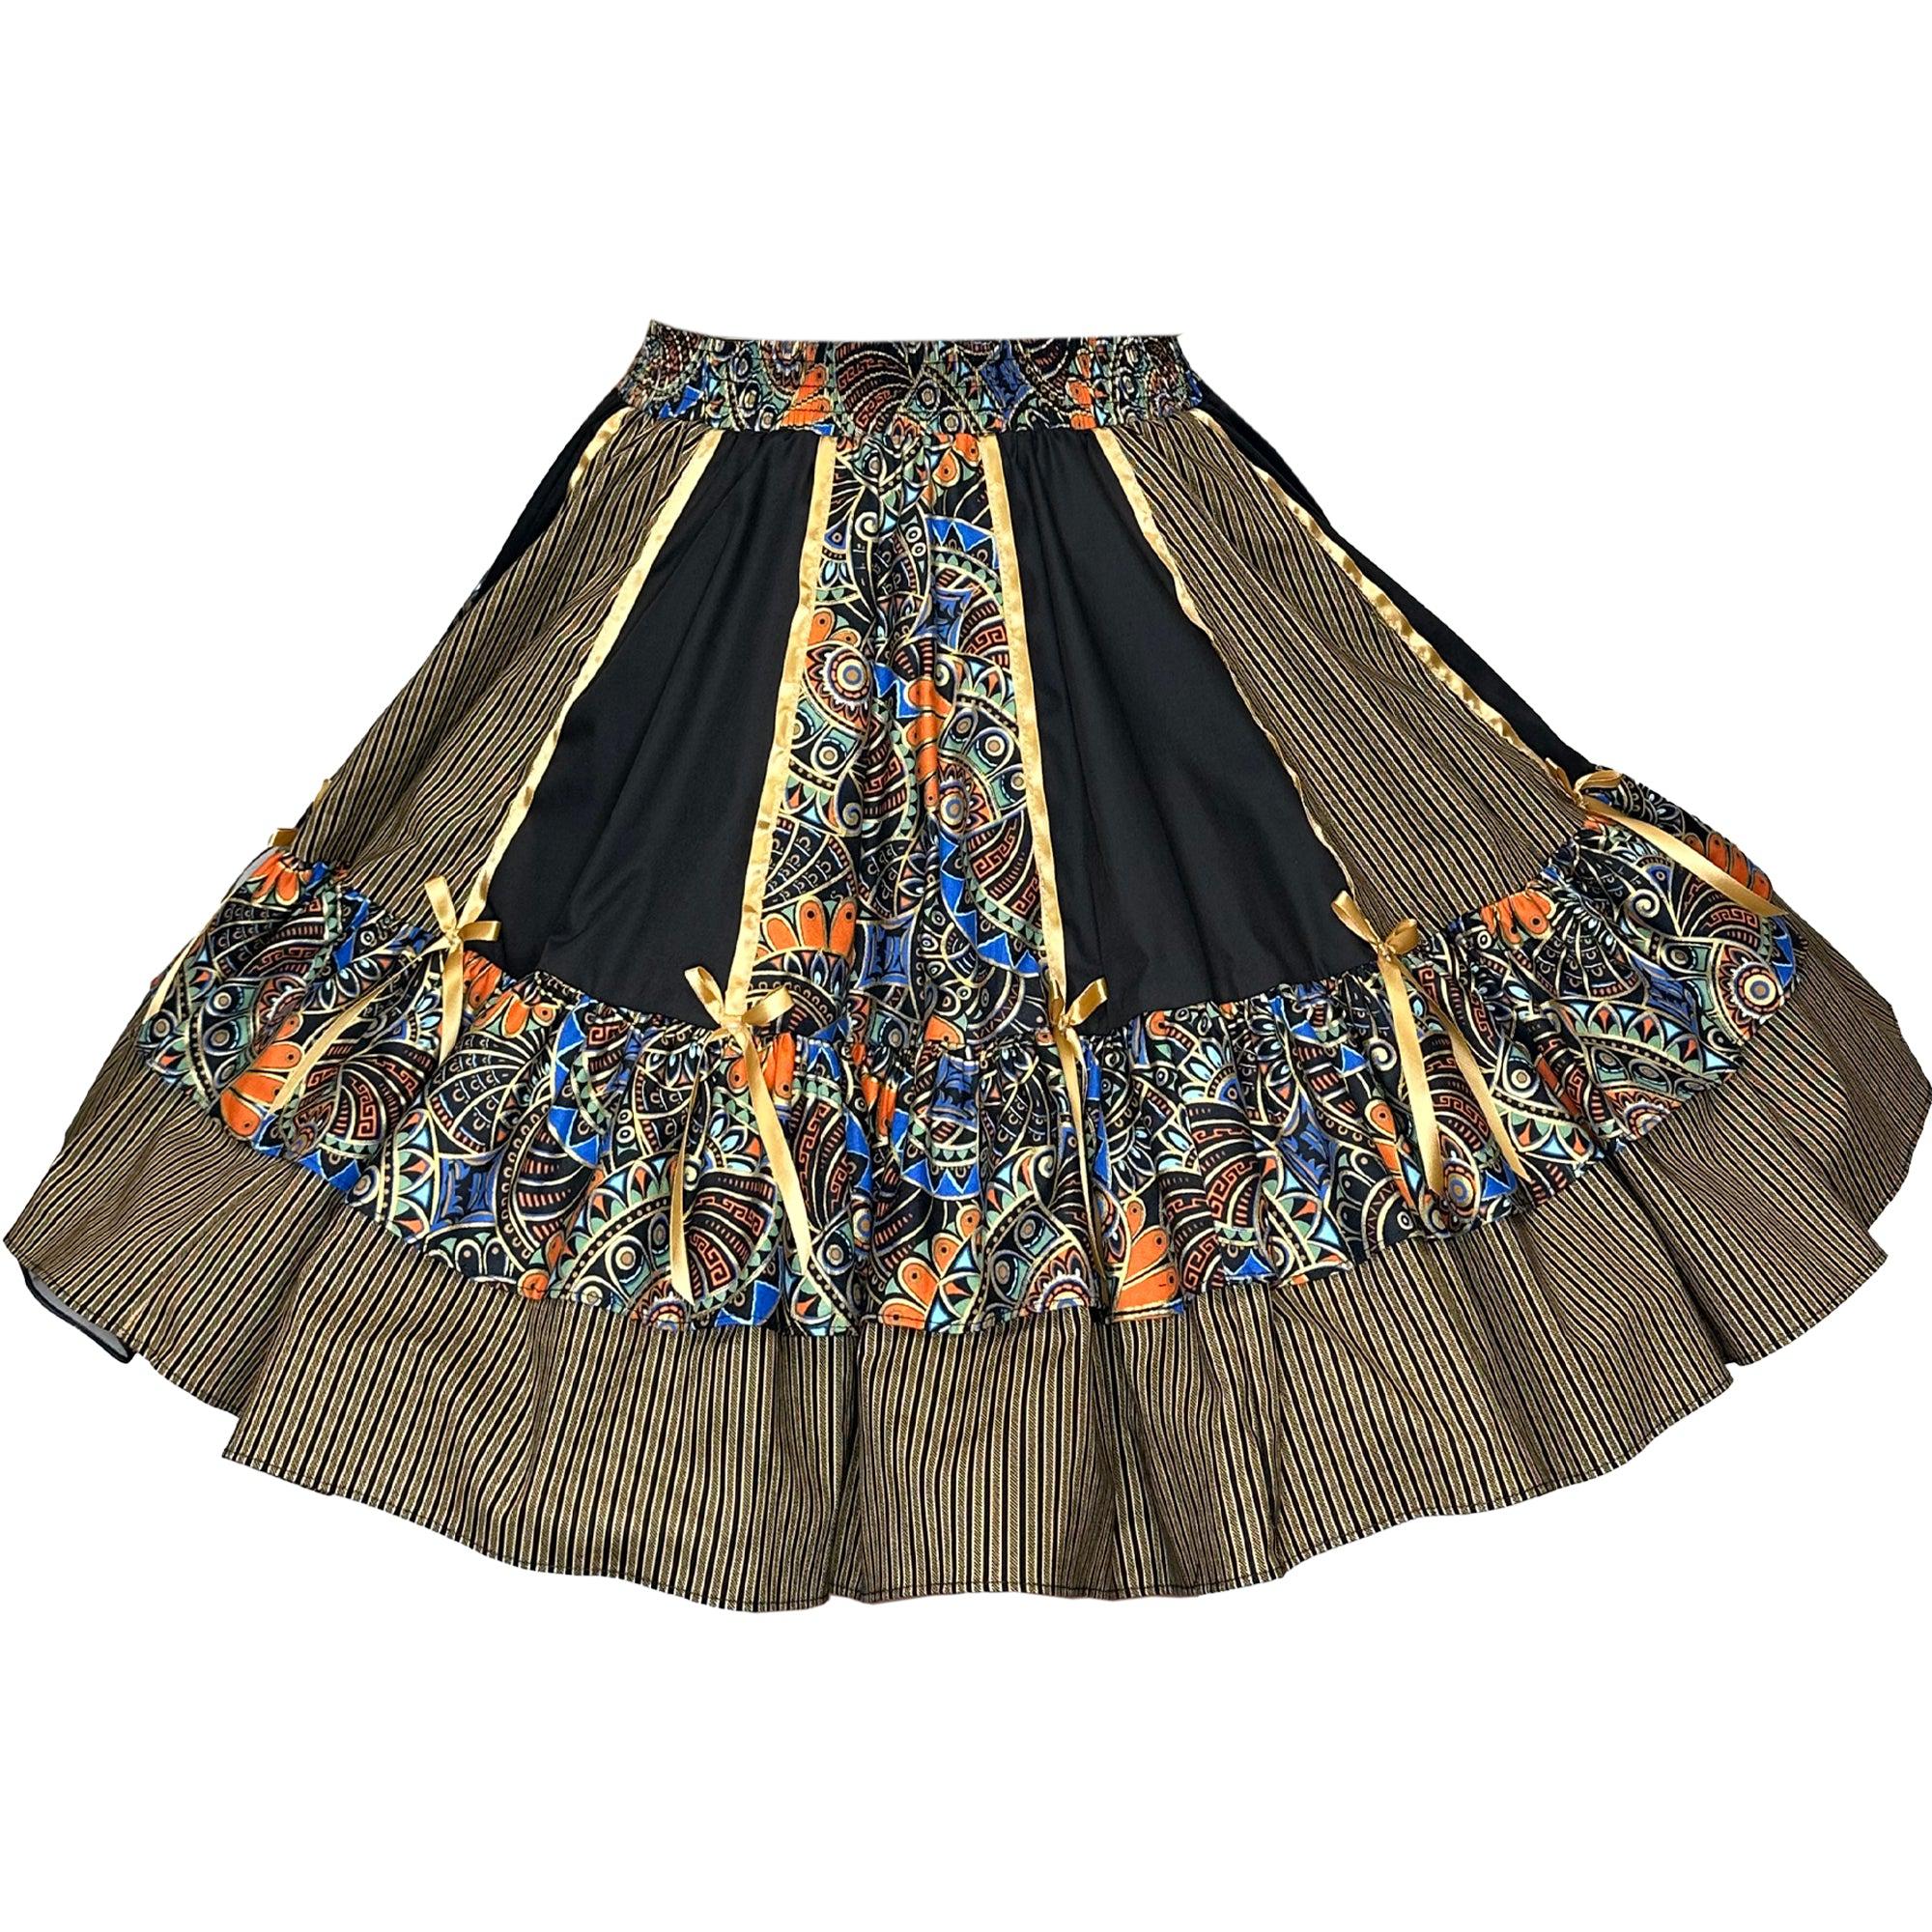 A black and orange Sophisticated Gold Stripe Skirt with ruffles from Square Up Fashions.